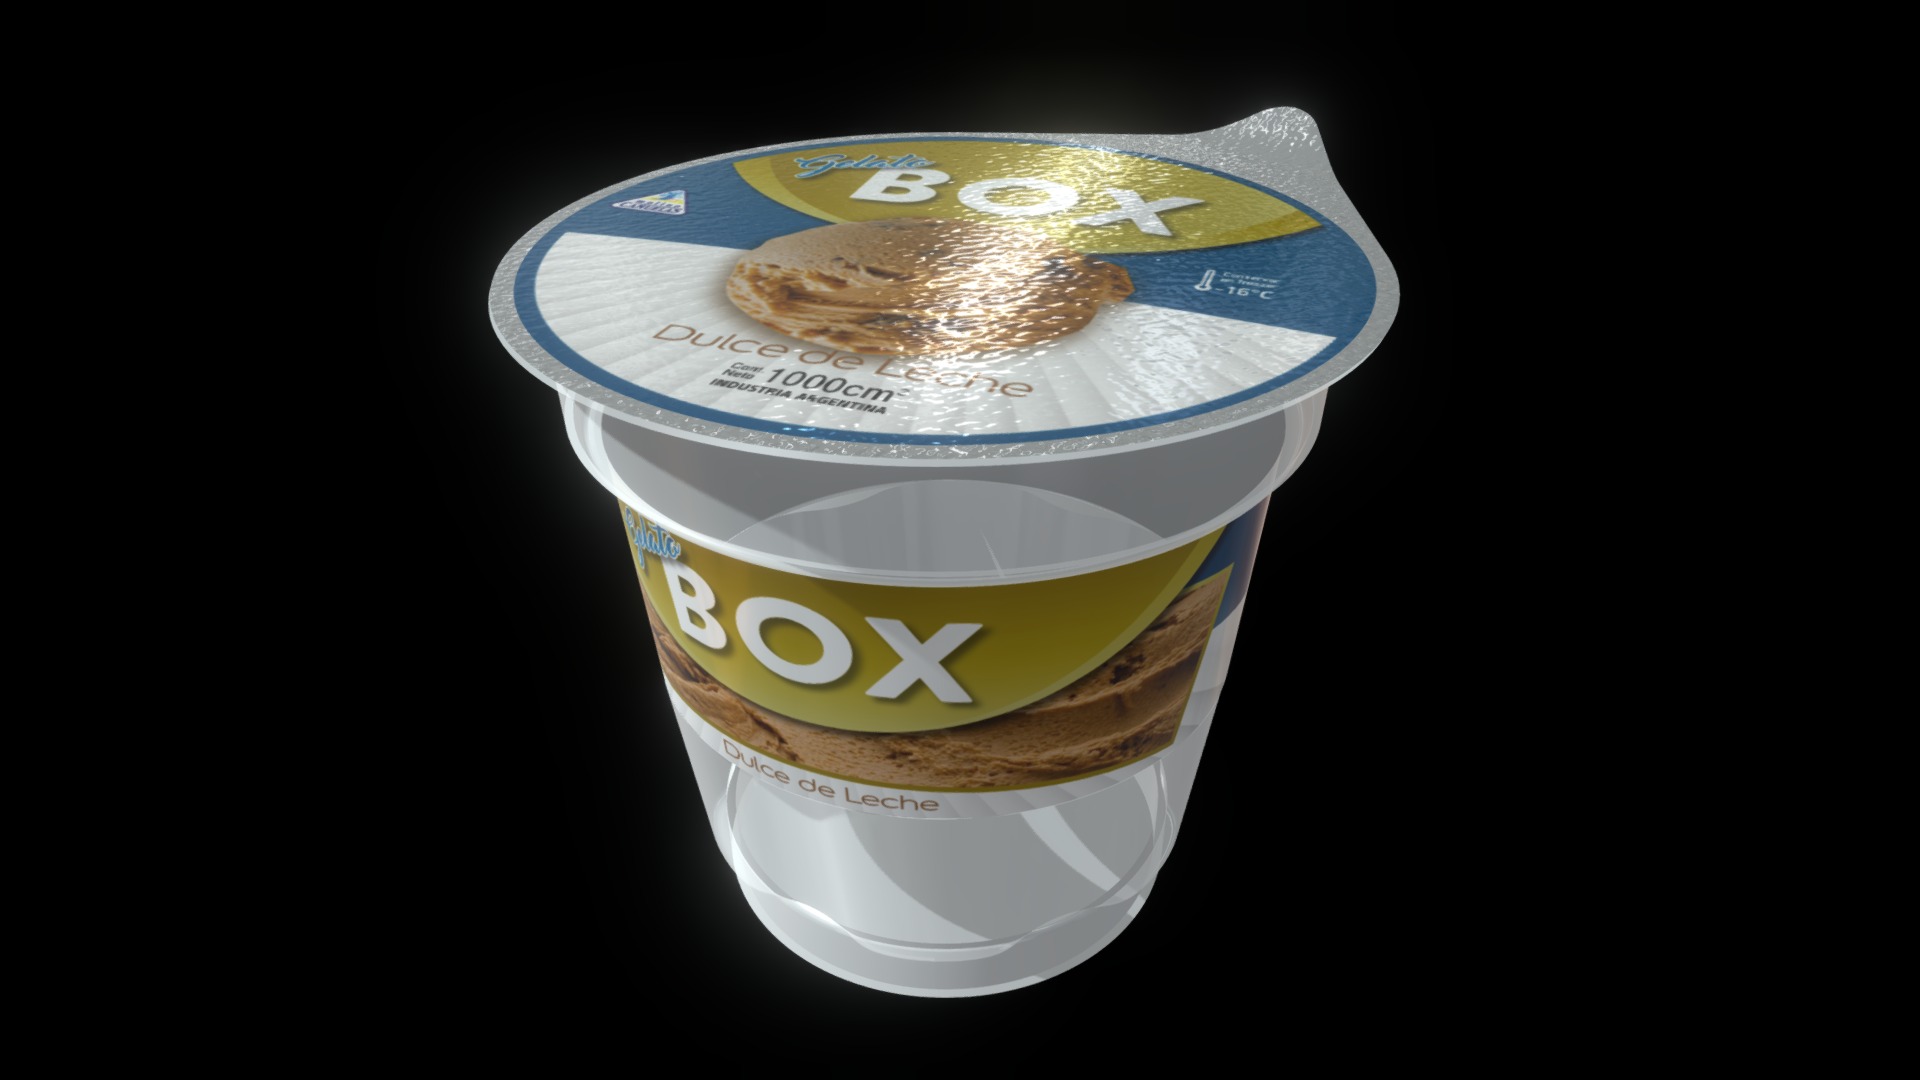 3D model Box Gelato - This is a 3D model of the Box Gelato. The 3D model is about a can of food.